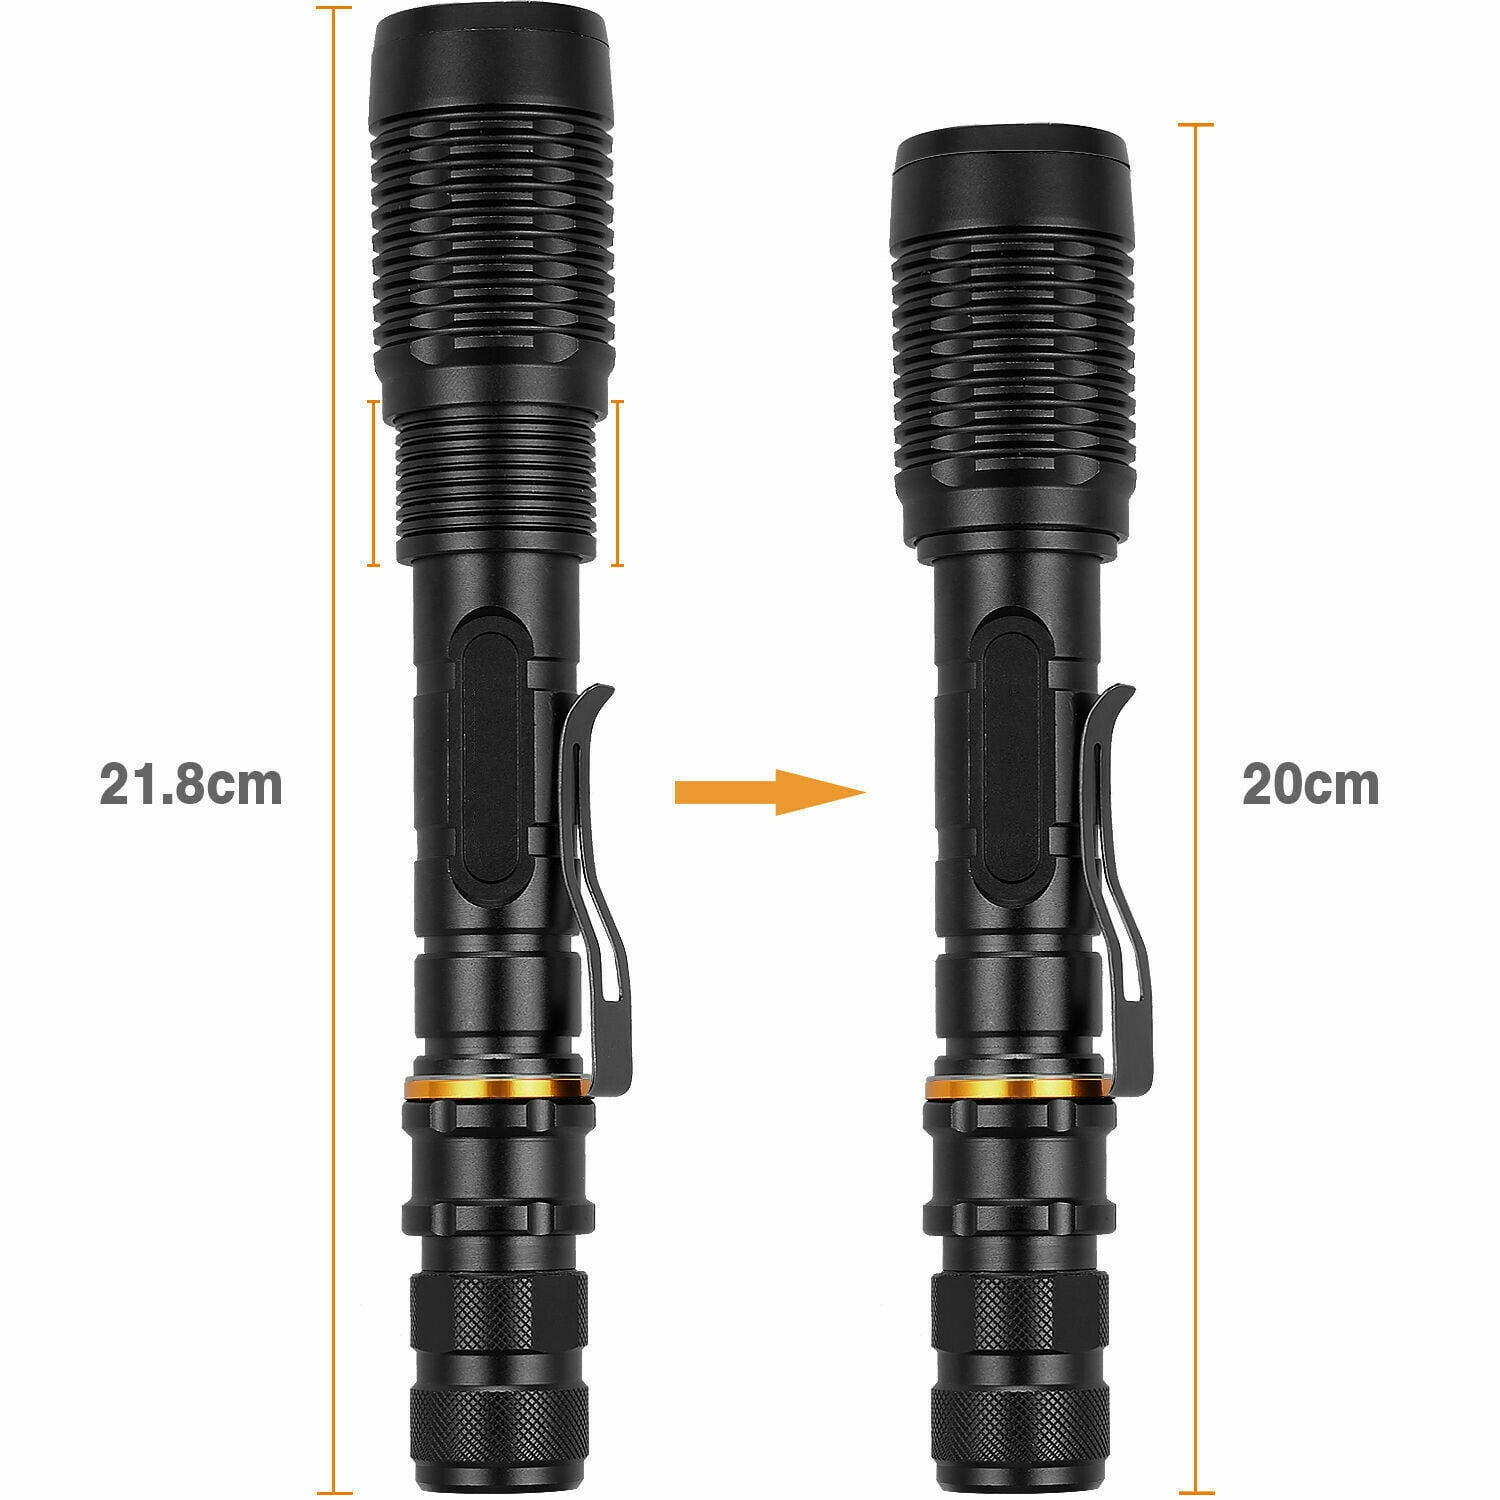 Tactical Police 990000Lumens 3 x T6 LED Zoomable Flashlight 18650 Torch Powerful 